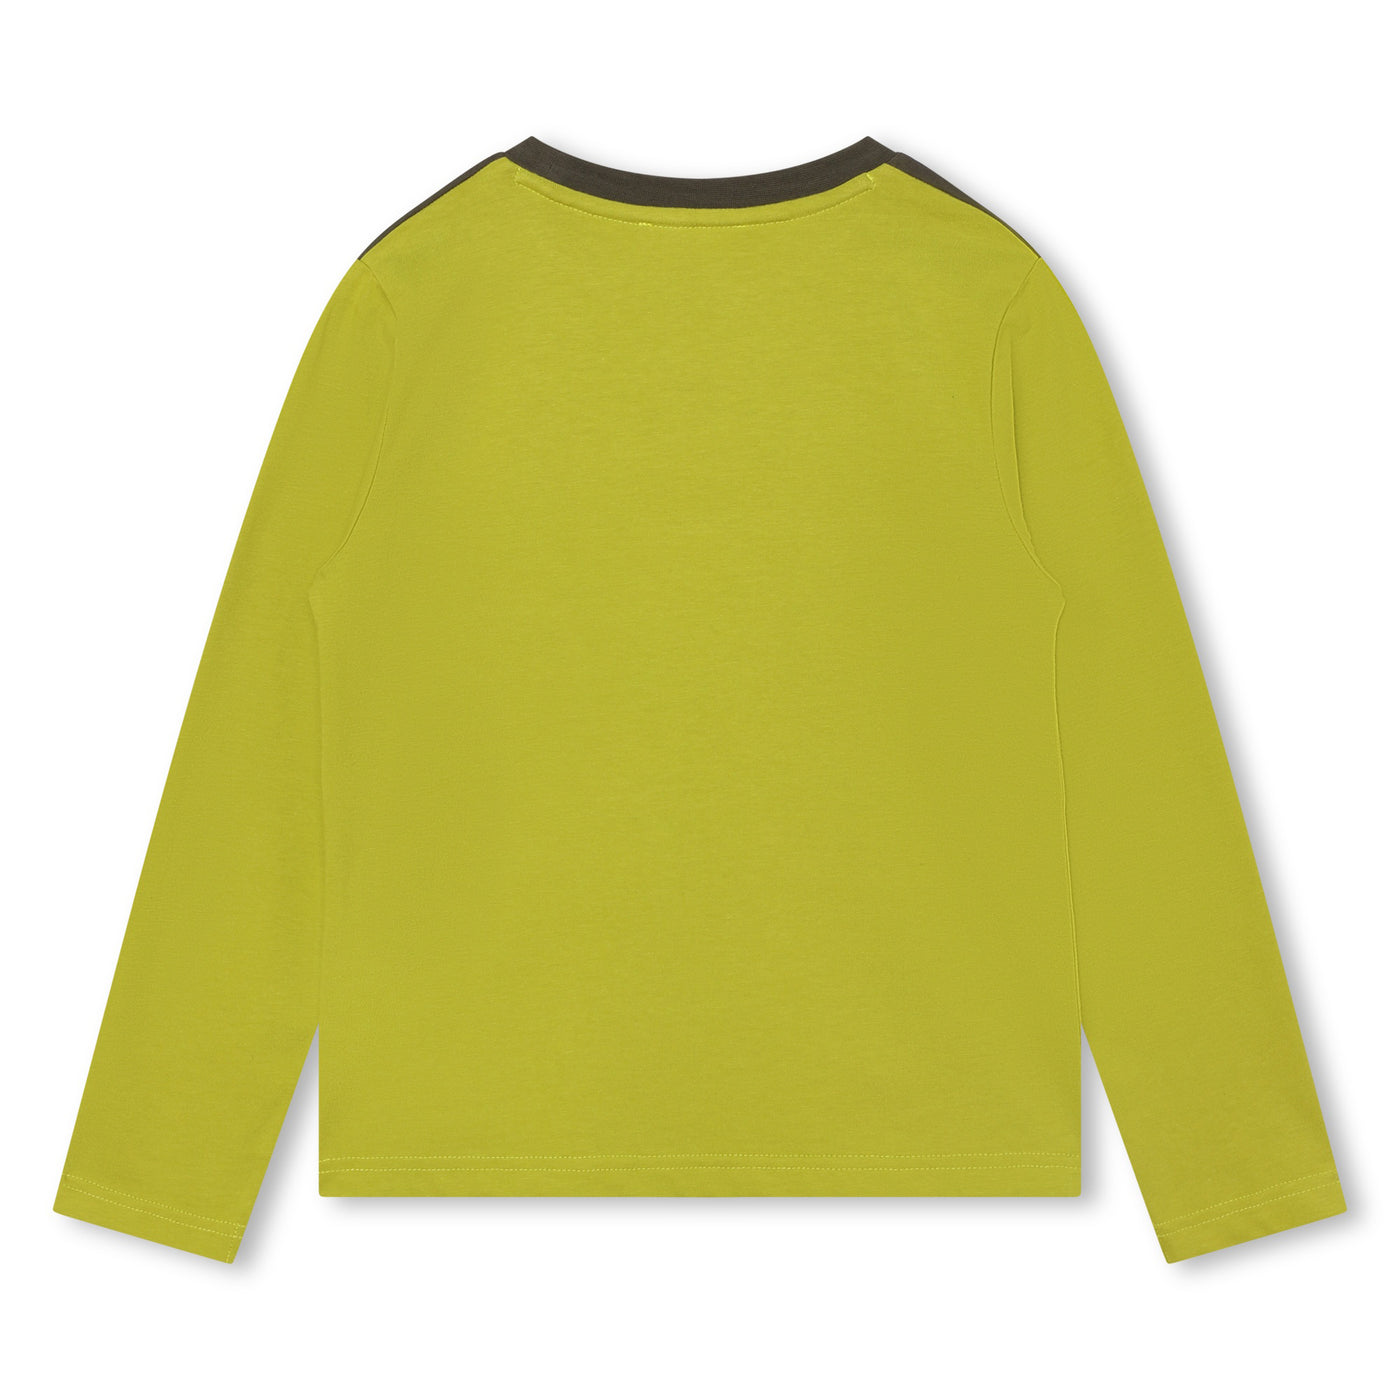 Lime Green Long Sleeve T-shirt By DKNY